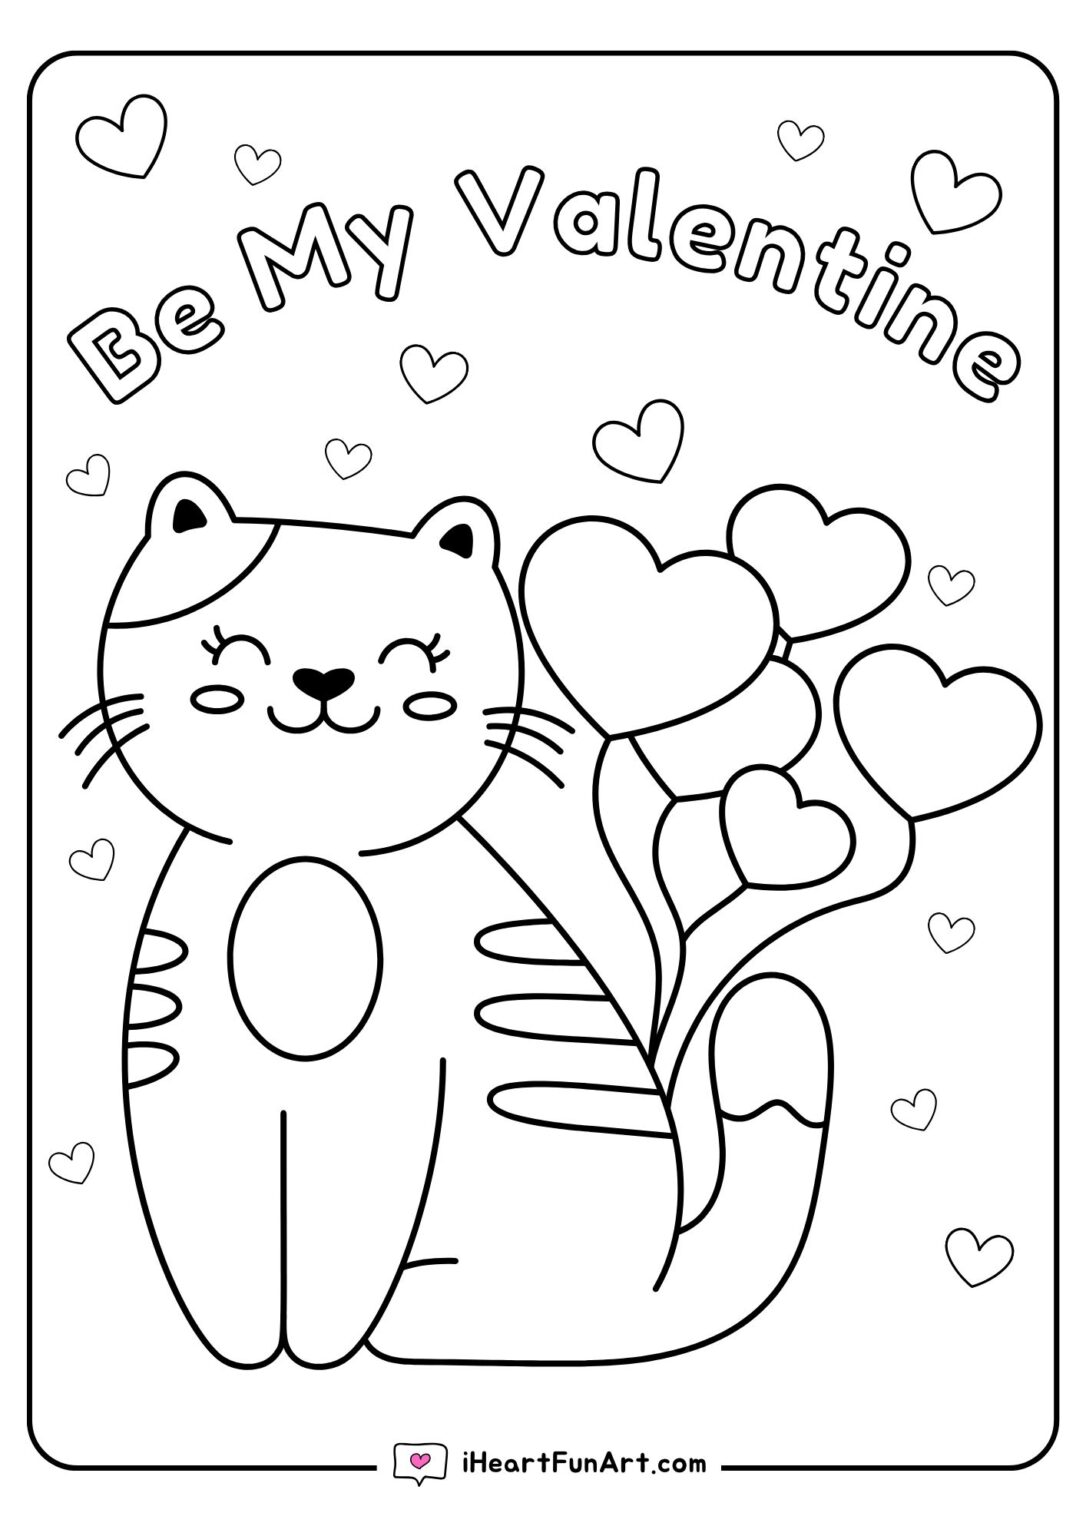 Valentines Coloring Pages - 100% FREE PRINTABLES